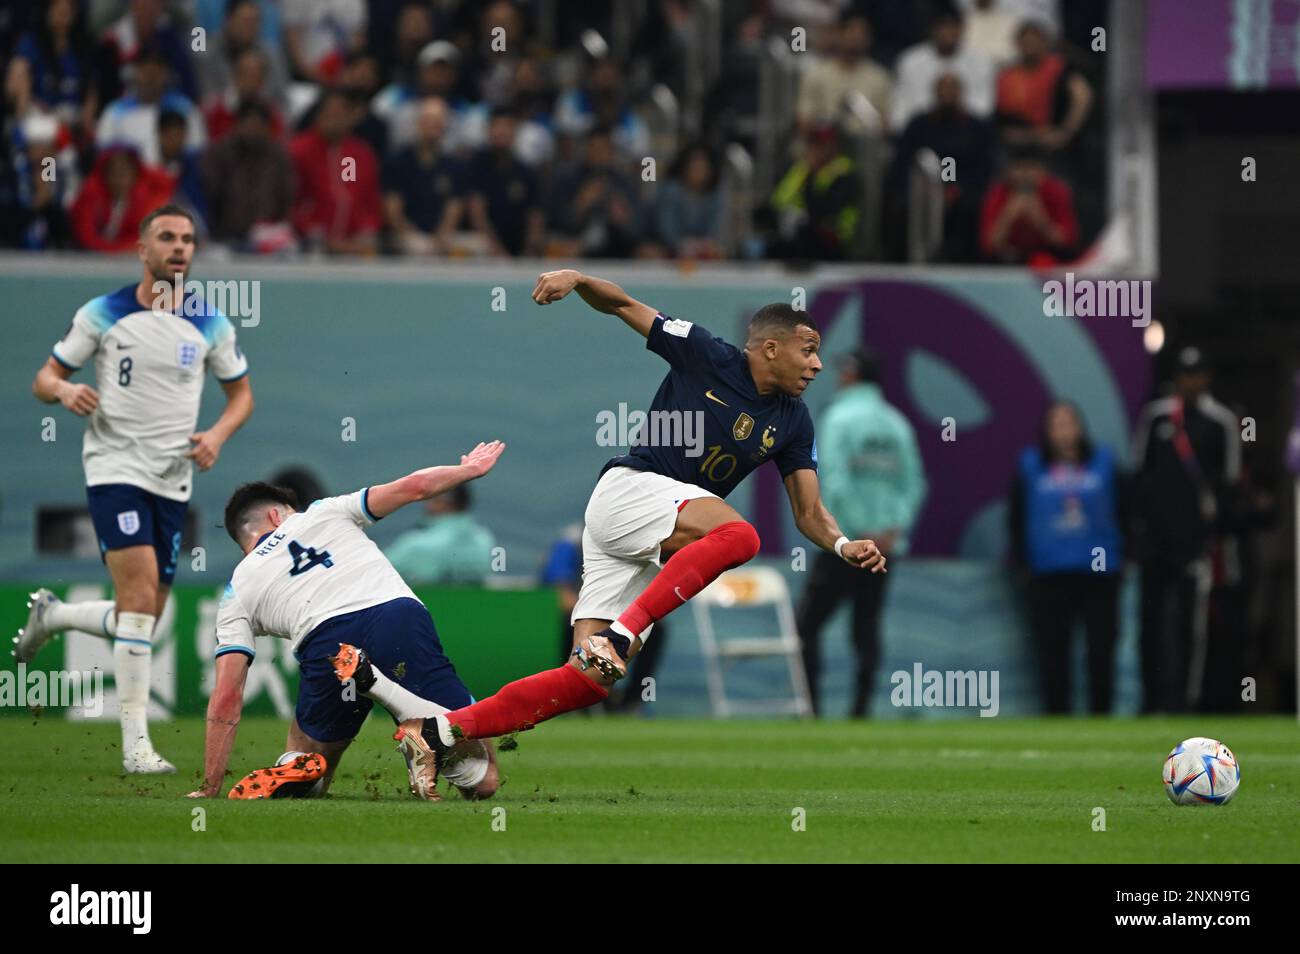 Kylian Mbappé (France) wins a footrace again England's Declan Rice during their quarter-final bout in Qatar as Jordan Henderson (ENG) looks on. Stock Photo